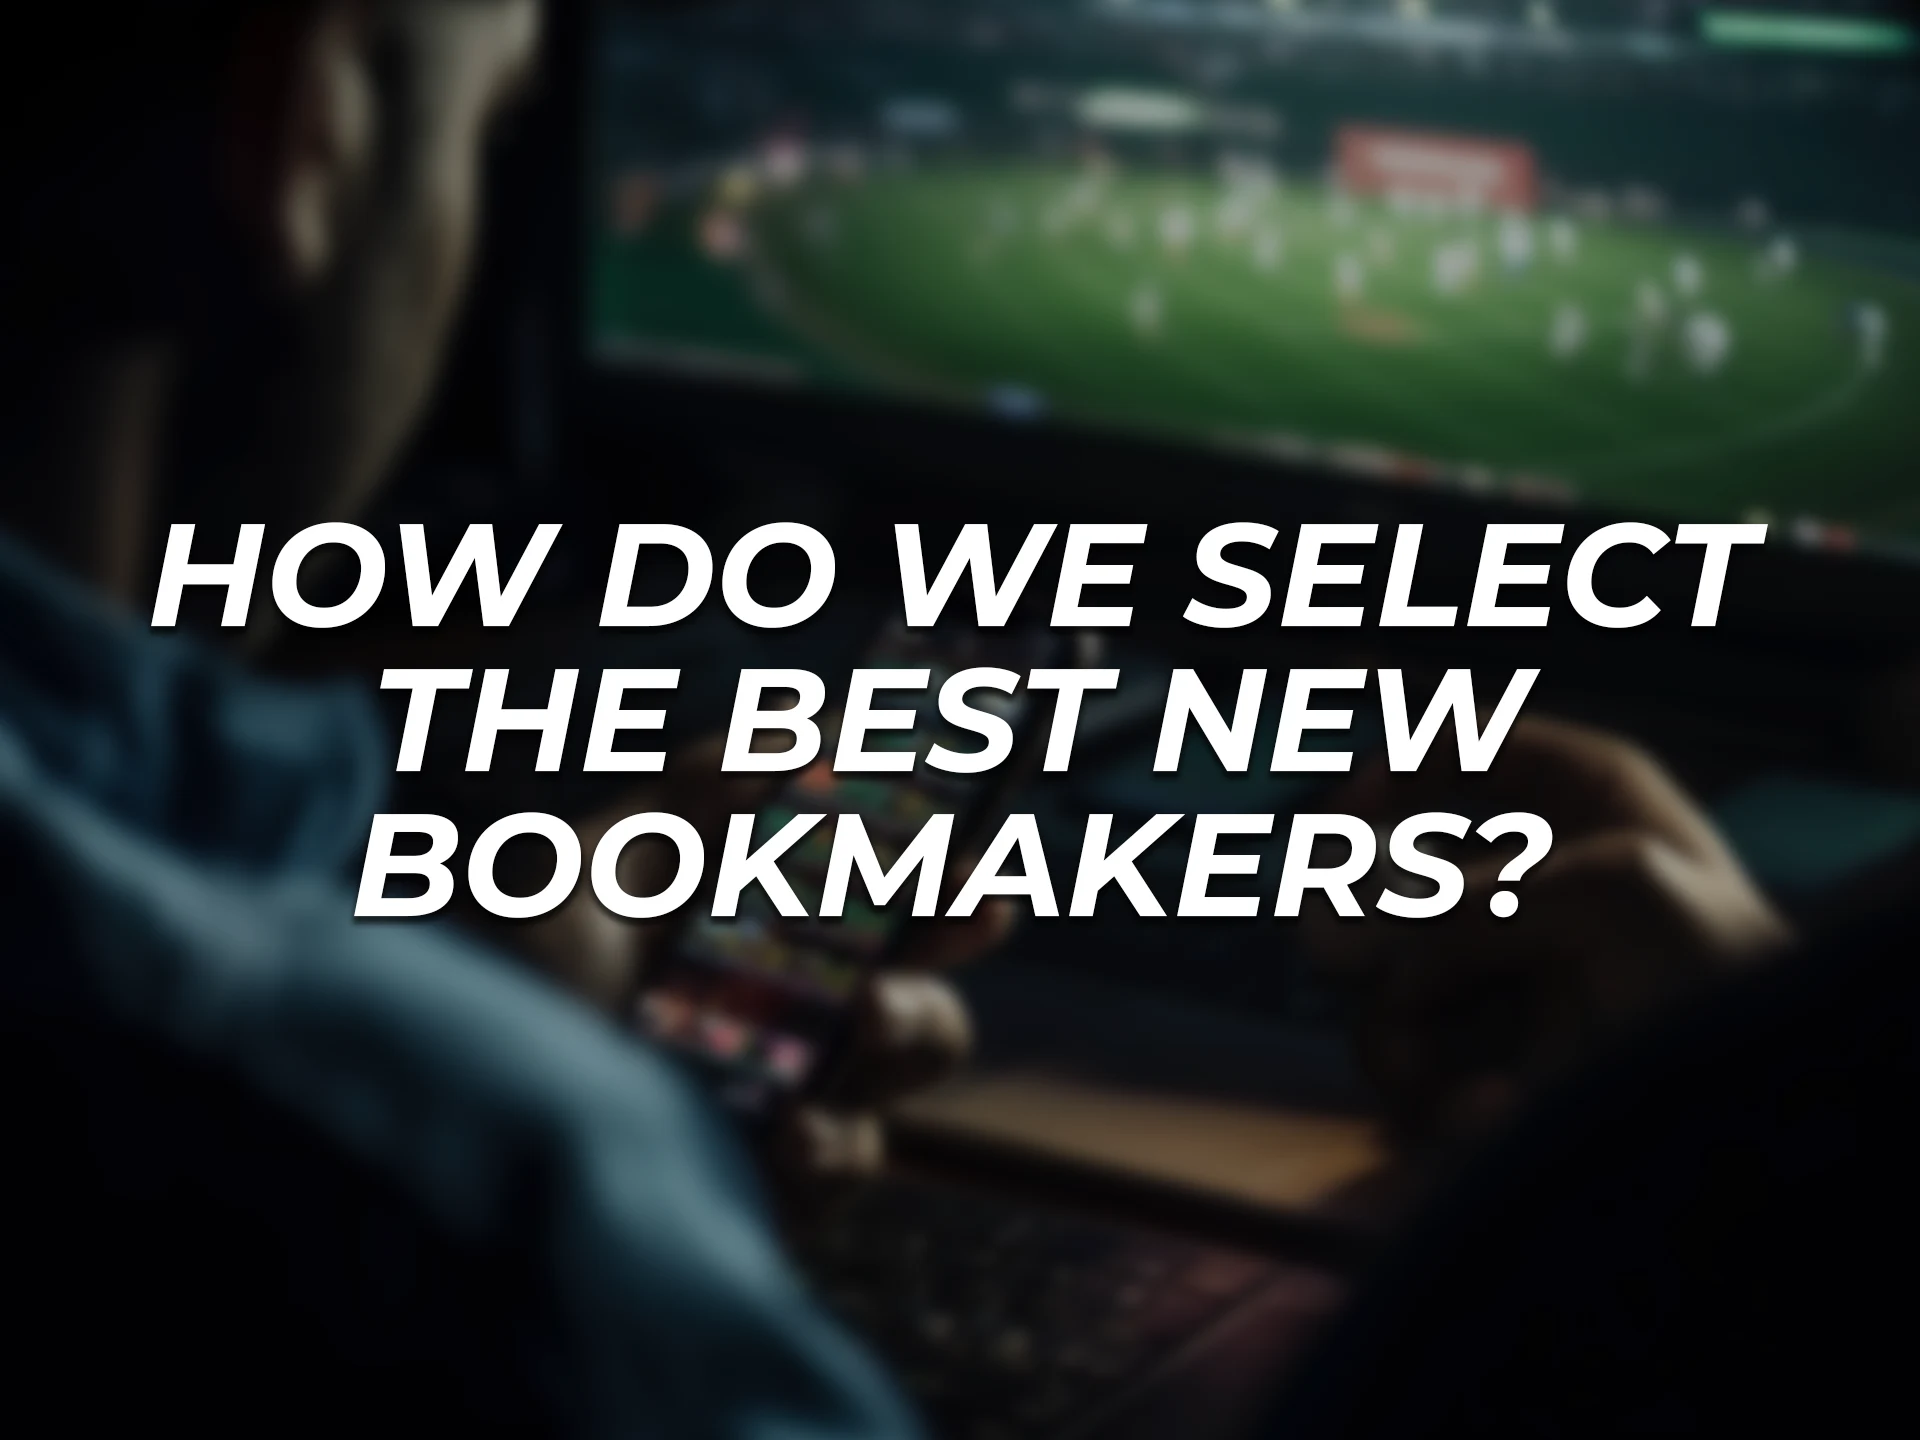 There are some criteria for choosing the new best bookmakers.